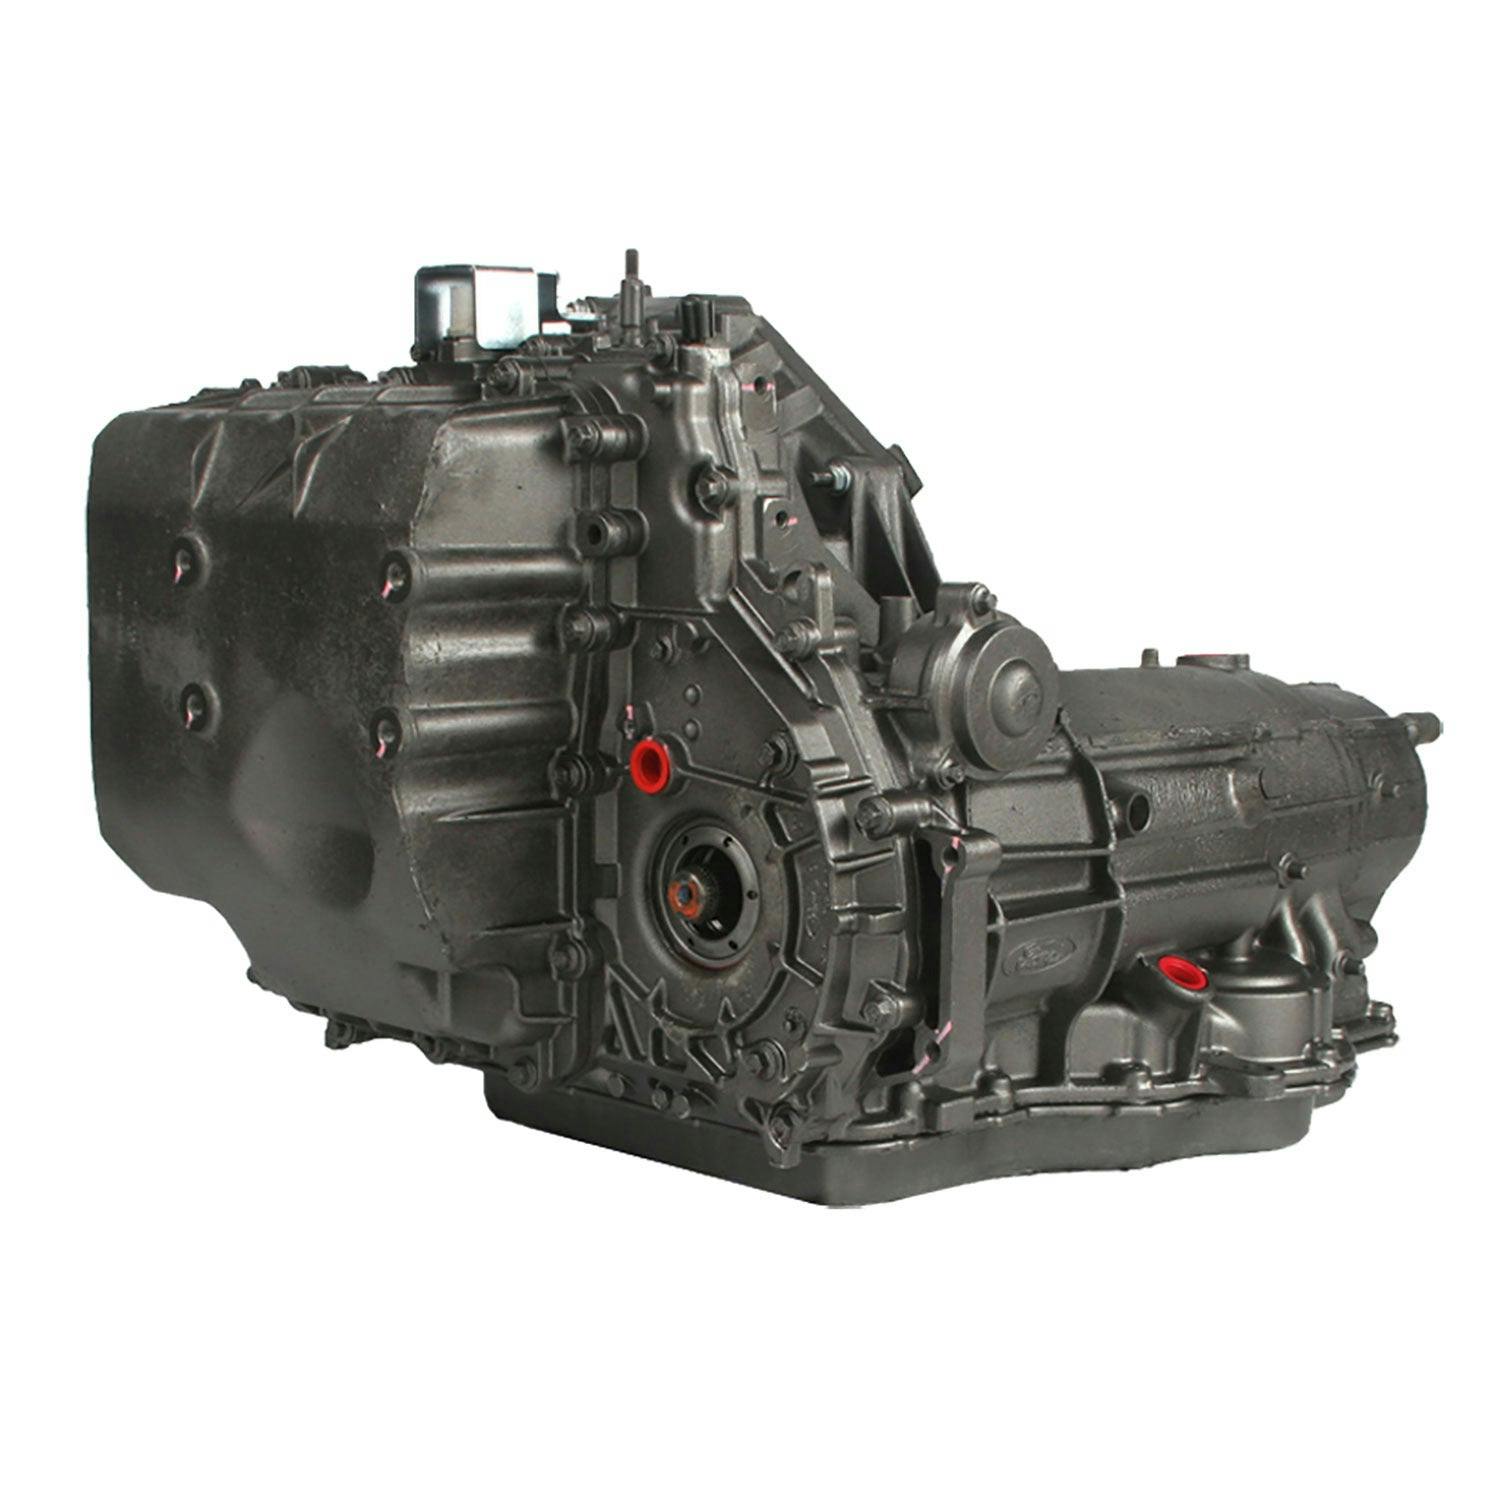 Automatic Transmission for 1996-1997 Ford Fusion/Mercury Milan FWD with 3L V6 Engine